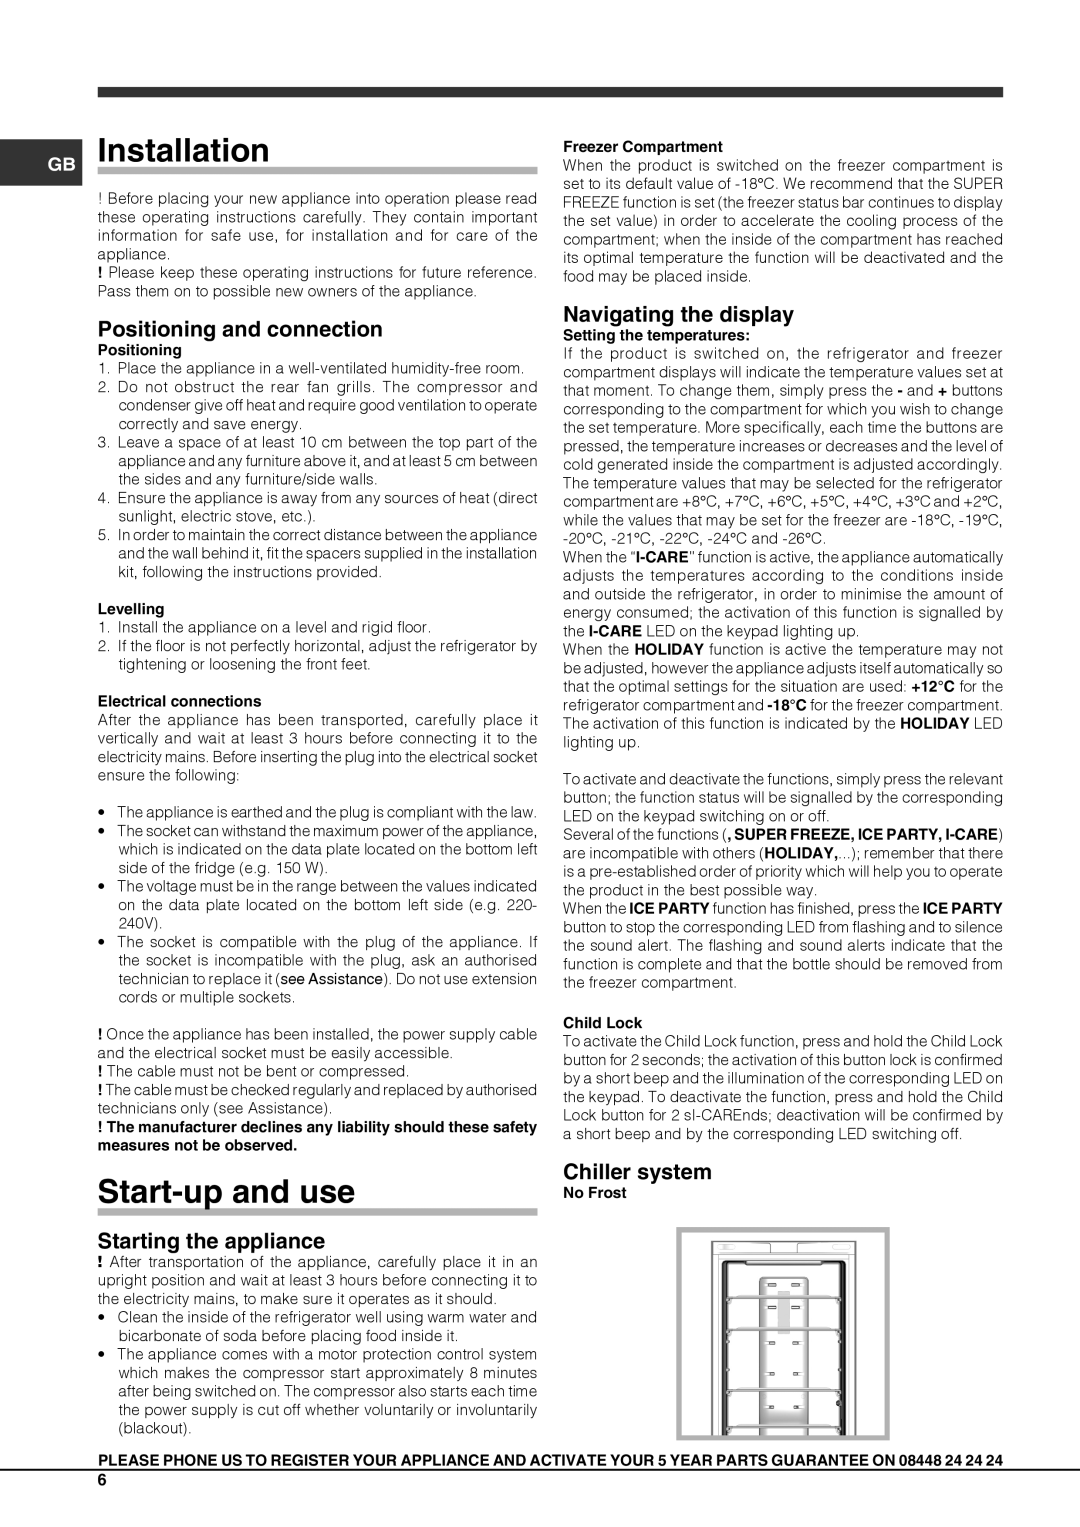 Hotpoint FFUG 20xx x O3 manual GB Installation, Start-up and use, Positioning and connection, Navigating the display 